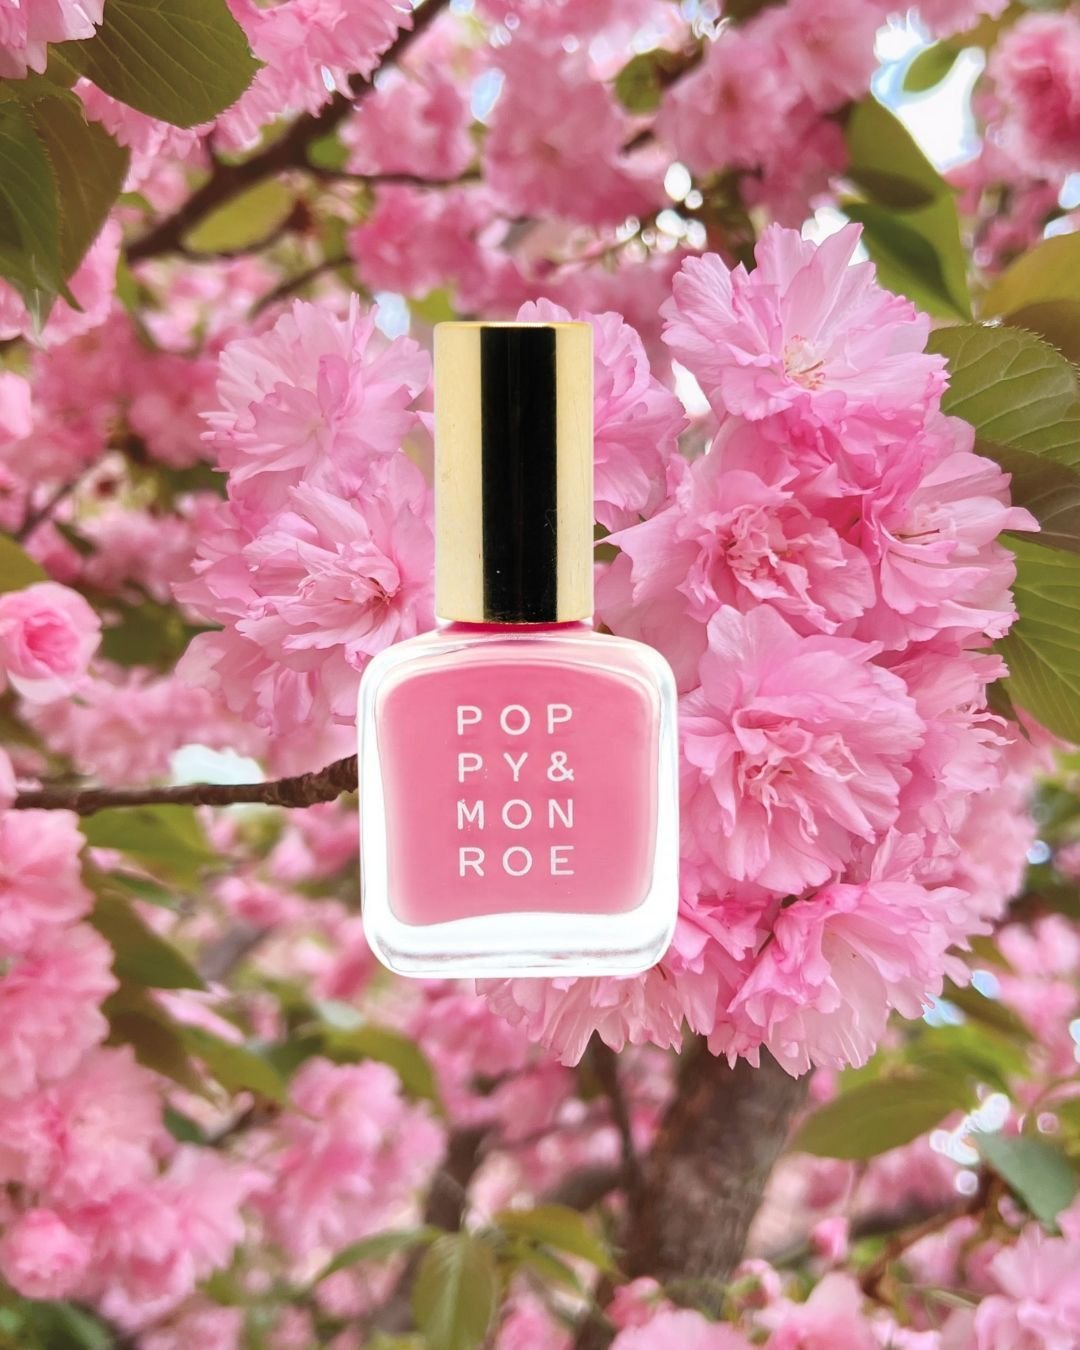 Strolling through Germantown and stumbled upon the perfect spring hue inspiration! 🌸 Meet &quot;Joanna,&quot; our lovely pink polish that mirrors the delicate beauty of cherry blossoms. 💅💖 Who's ready to add a touch of pink petal-perfection to you